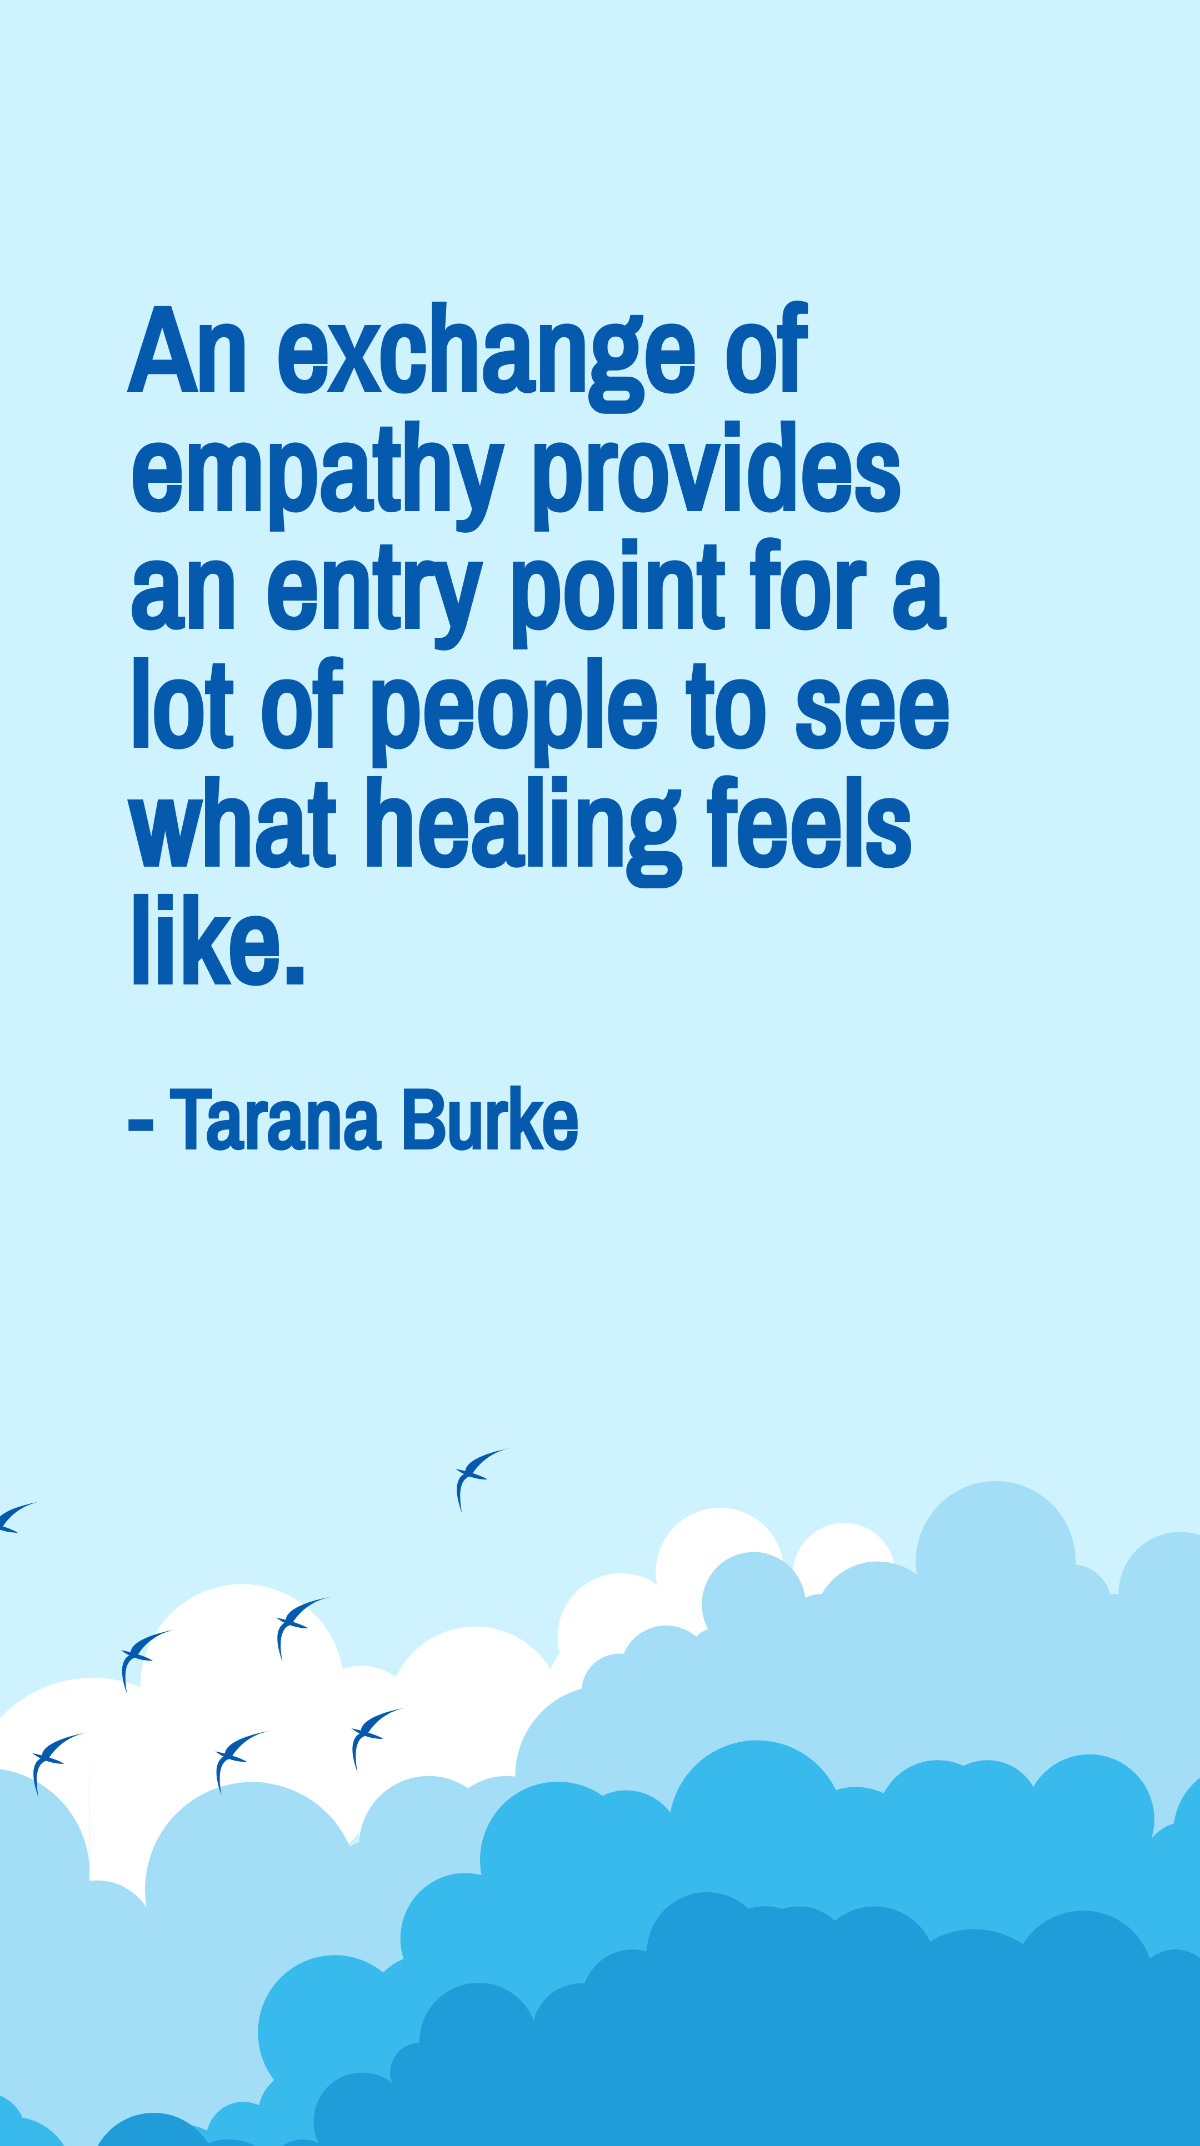 Tarana Burke - An exchange of empathy provides an entry point for a lot of people to see what healing feels like.